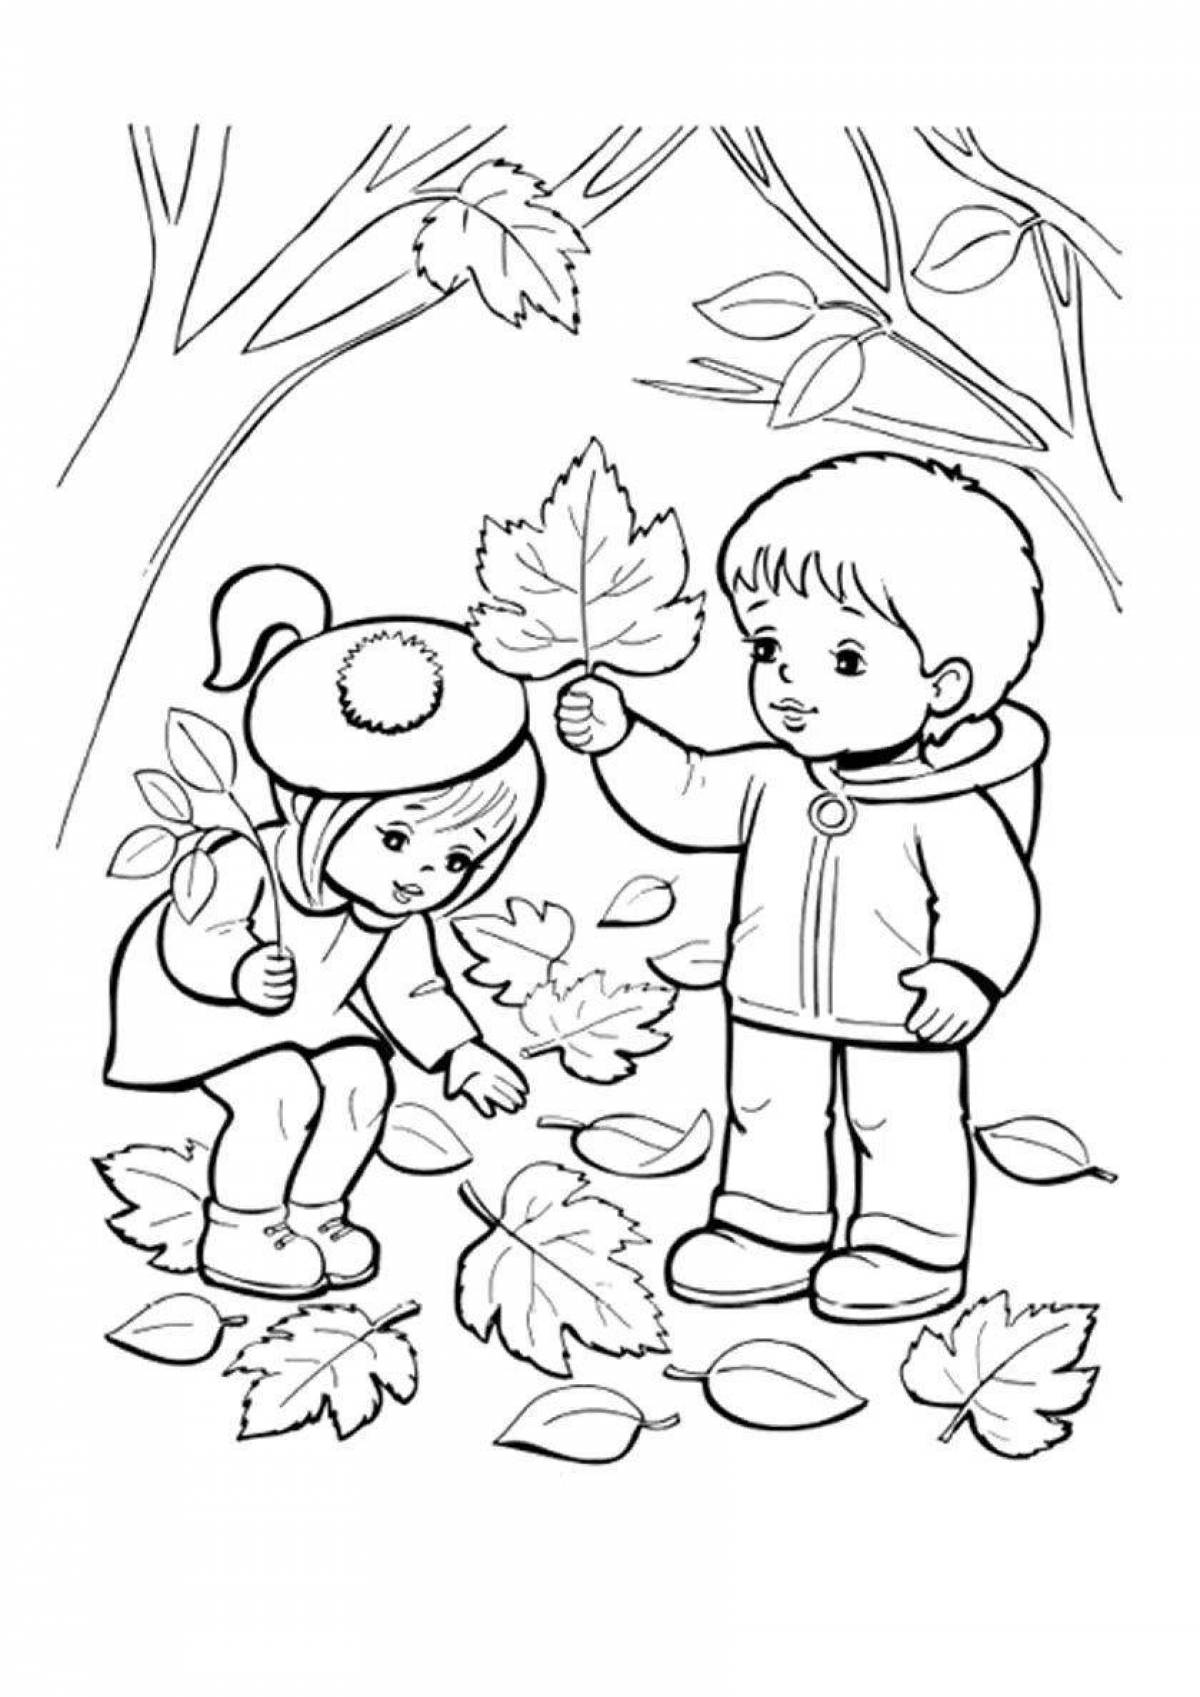 Playful walk coloring book for kids